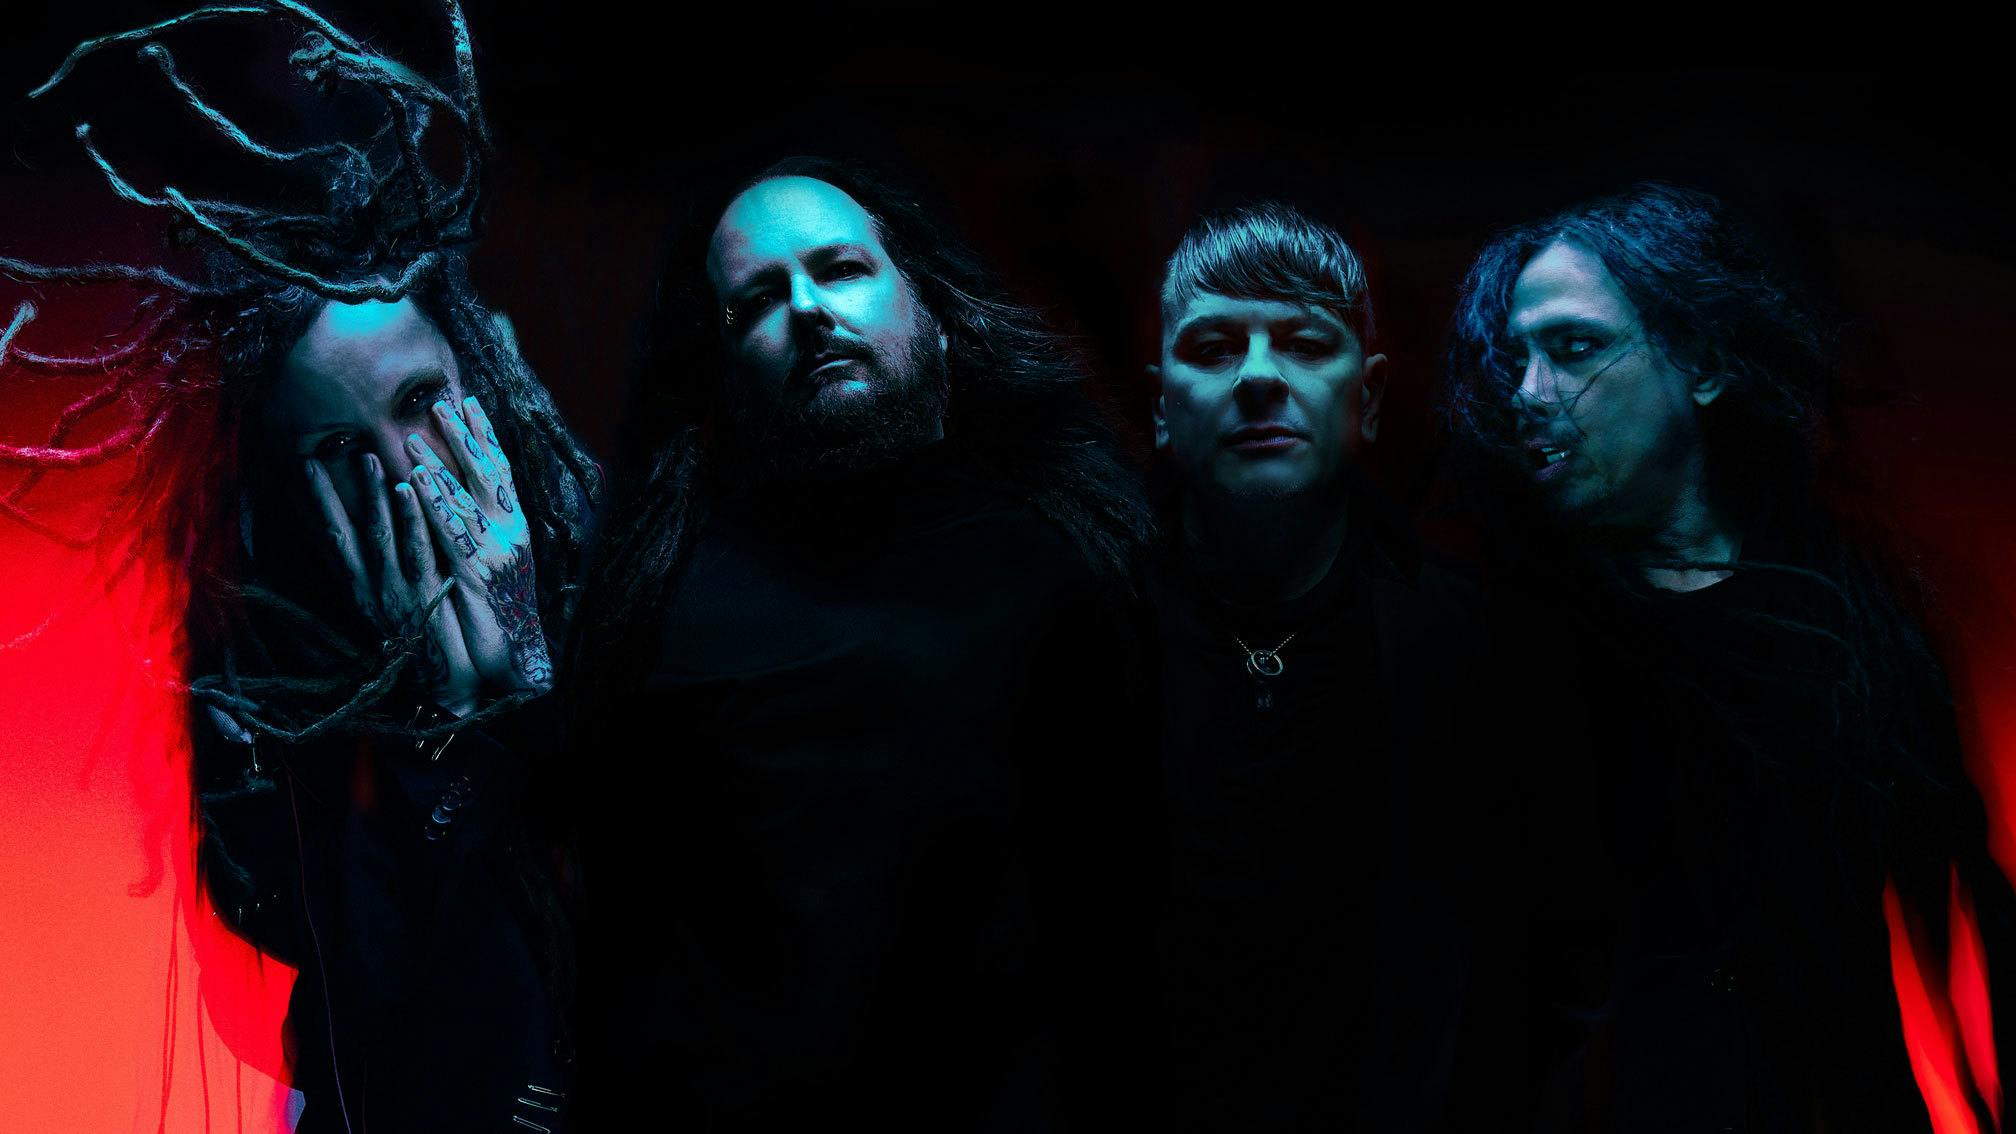 Korn announce 2022 U.S. tour with Chevelle and Code Orange